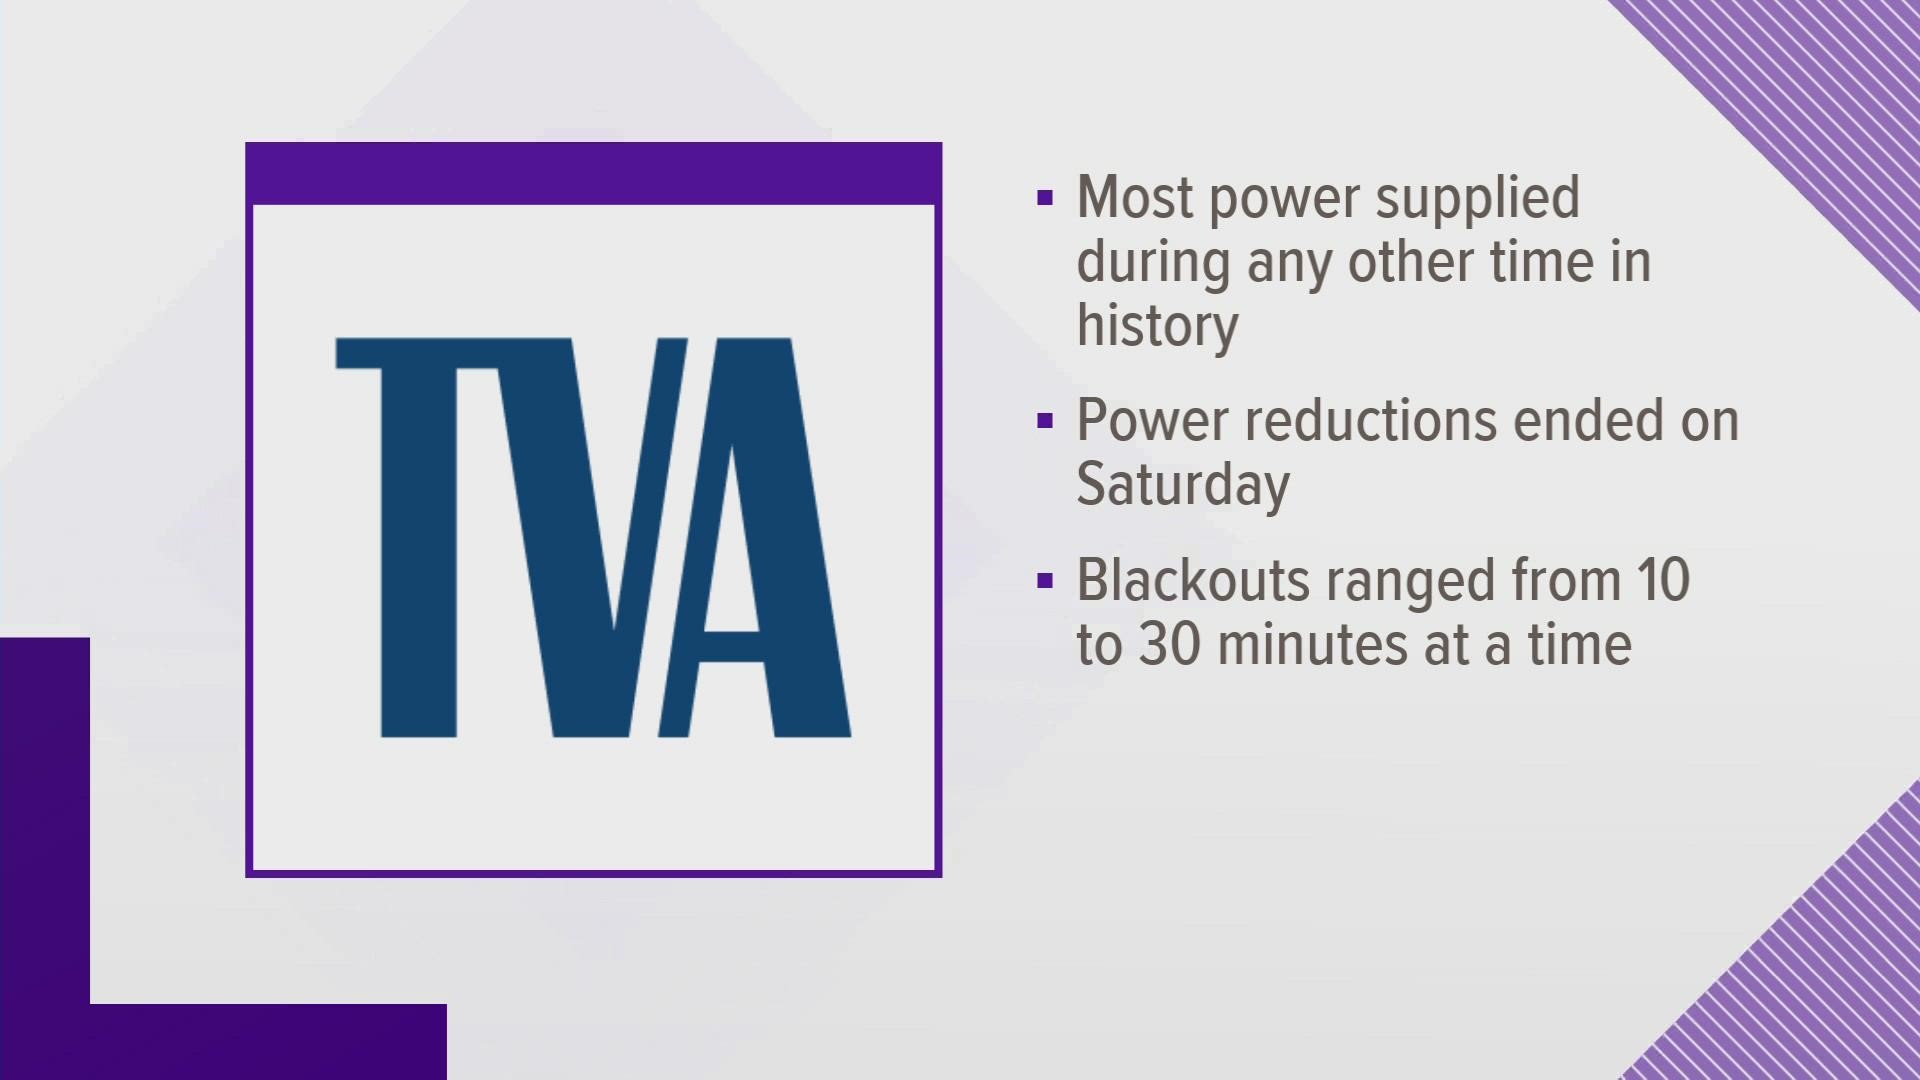 TVA said the record for the most 24-hour electricity demand ever supplied in their history was set on Friday at 740 gigawatt-hours.